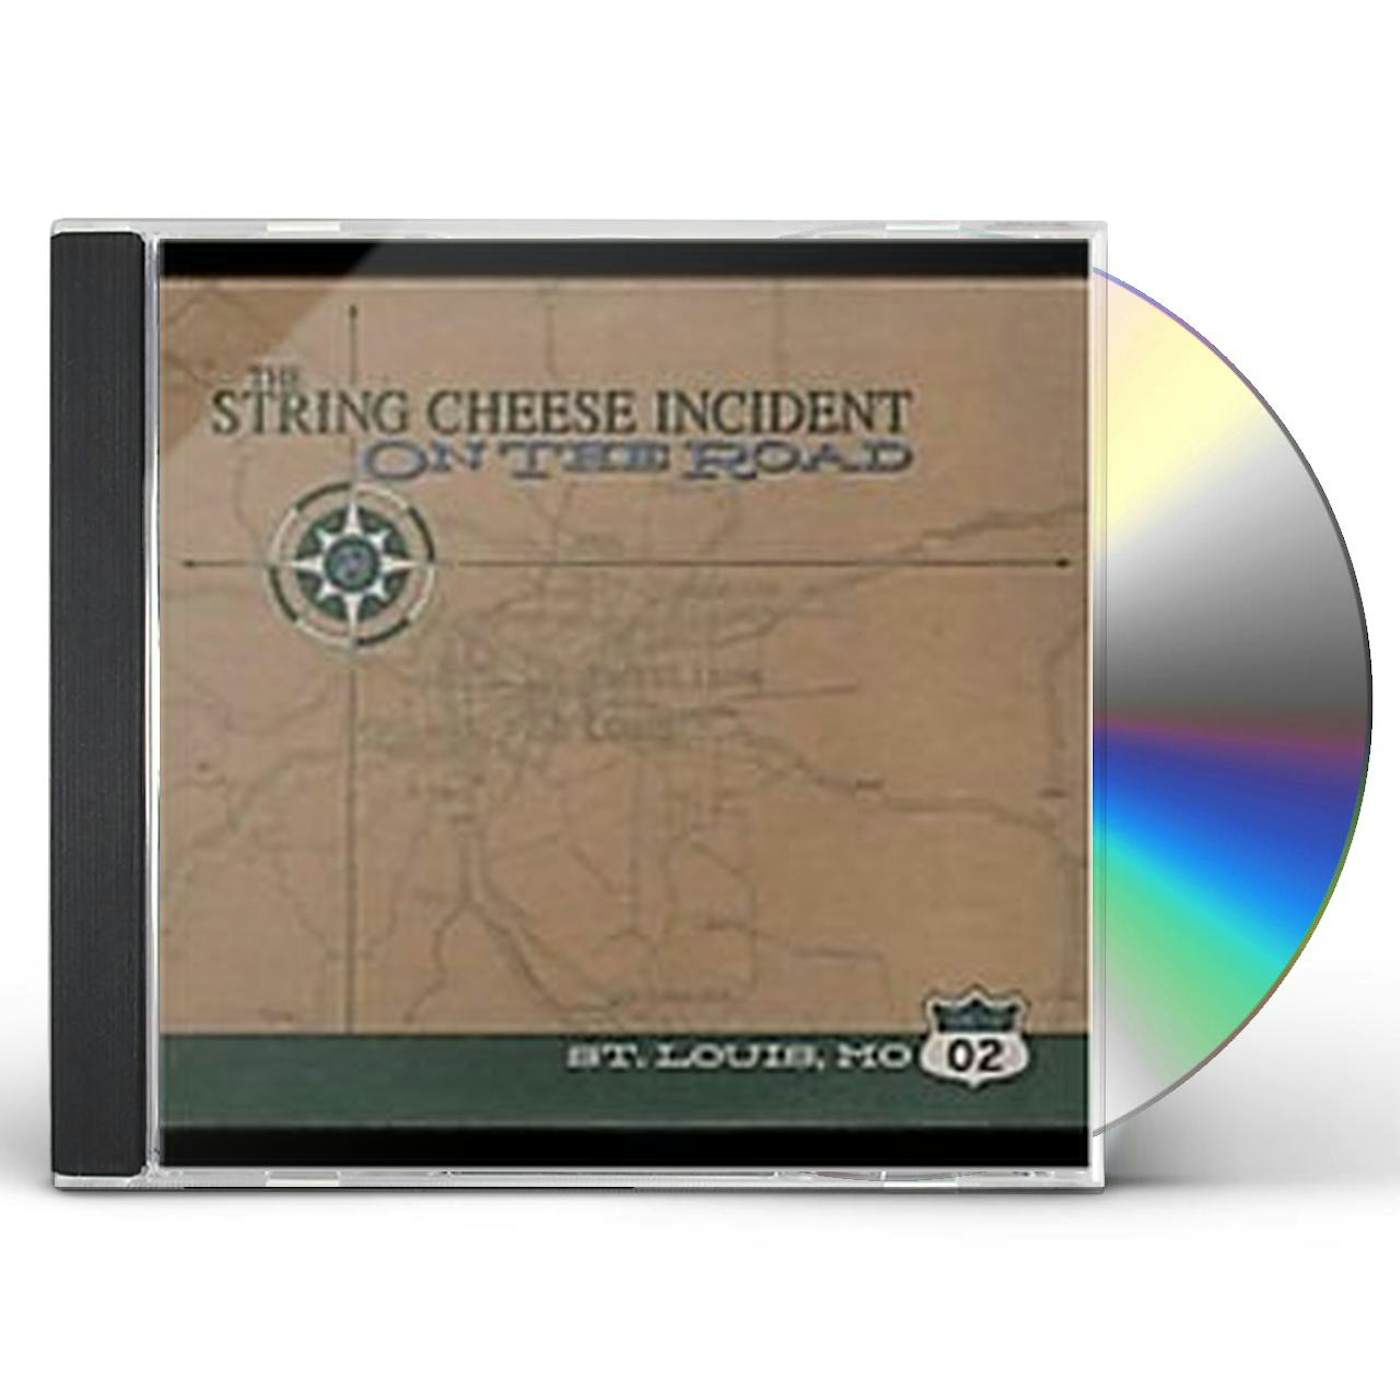 The String Cheese Incident JUNE 19 2002 ST LOUIS MO: ON THE ROAD CD